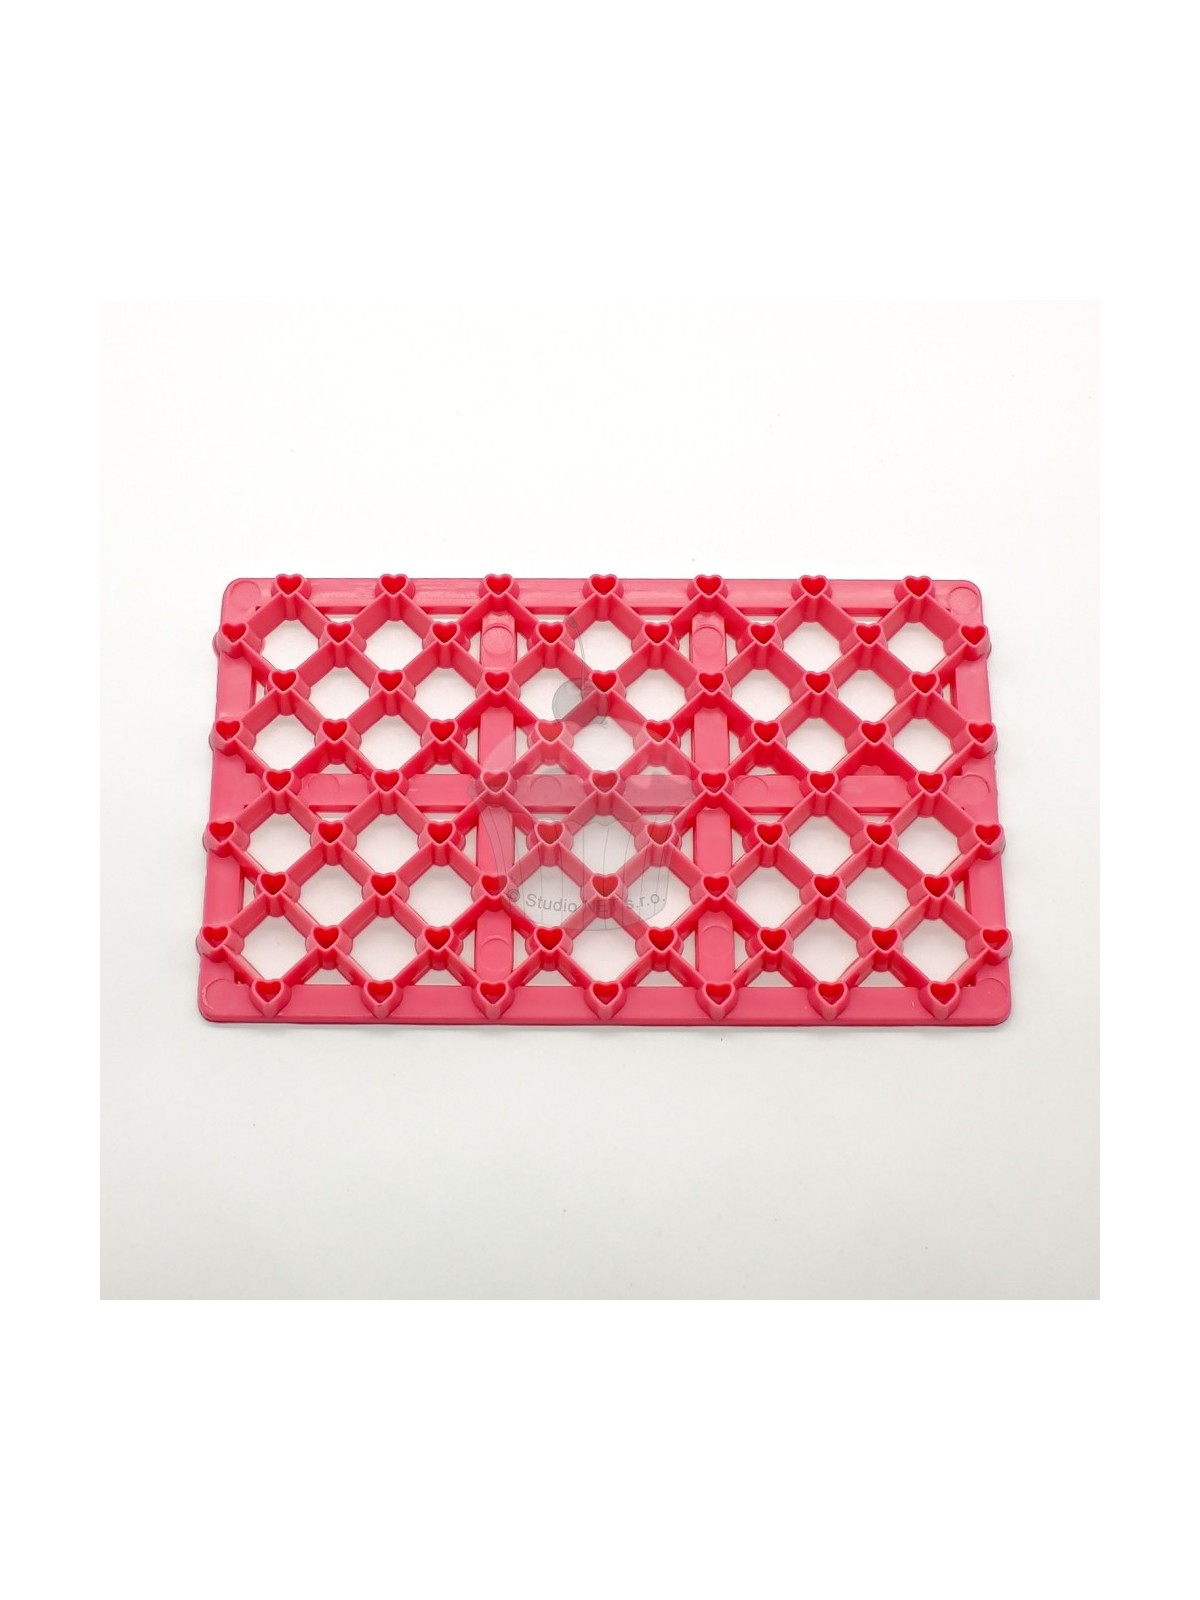 Pink Impression mat - small square + heart